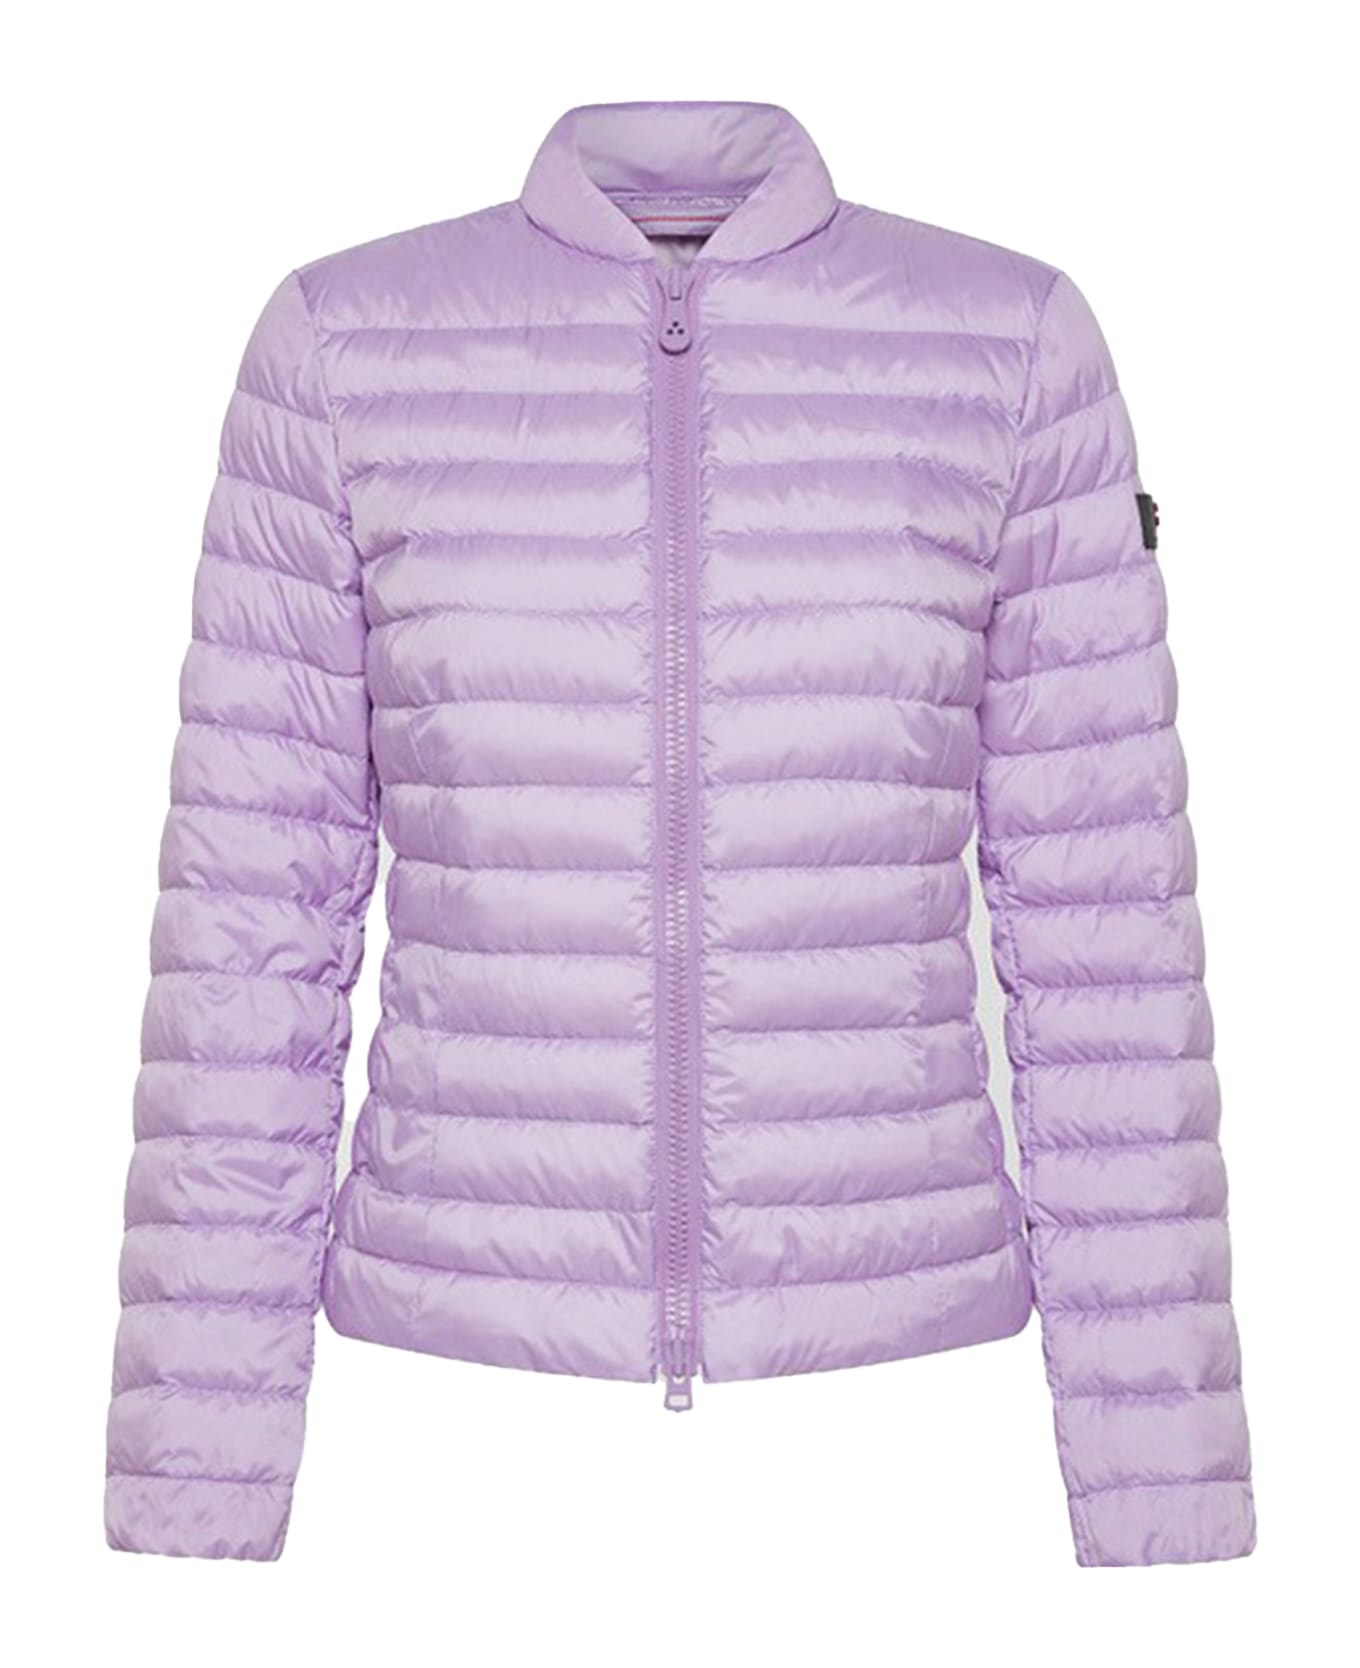 Peuterey Wisteria Quilted Down Jacket With Zip - GLICINE ダウンジャケット